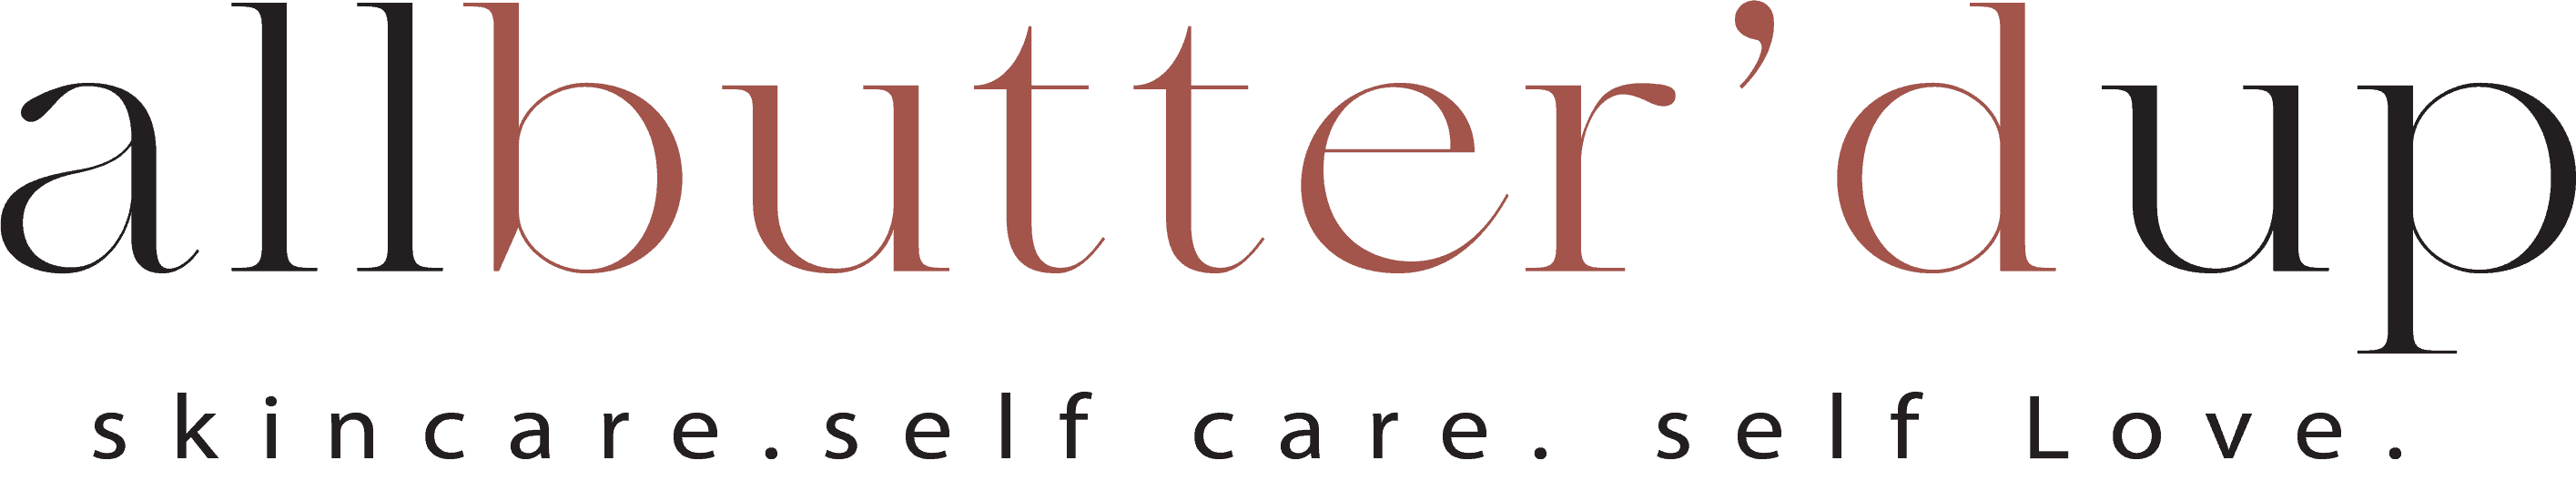 All buttered Up logo